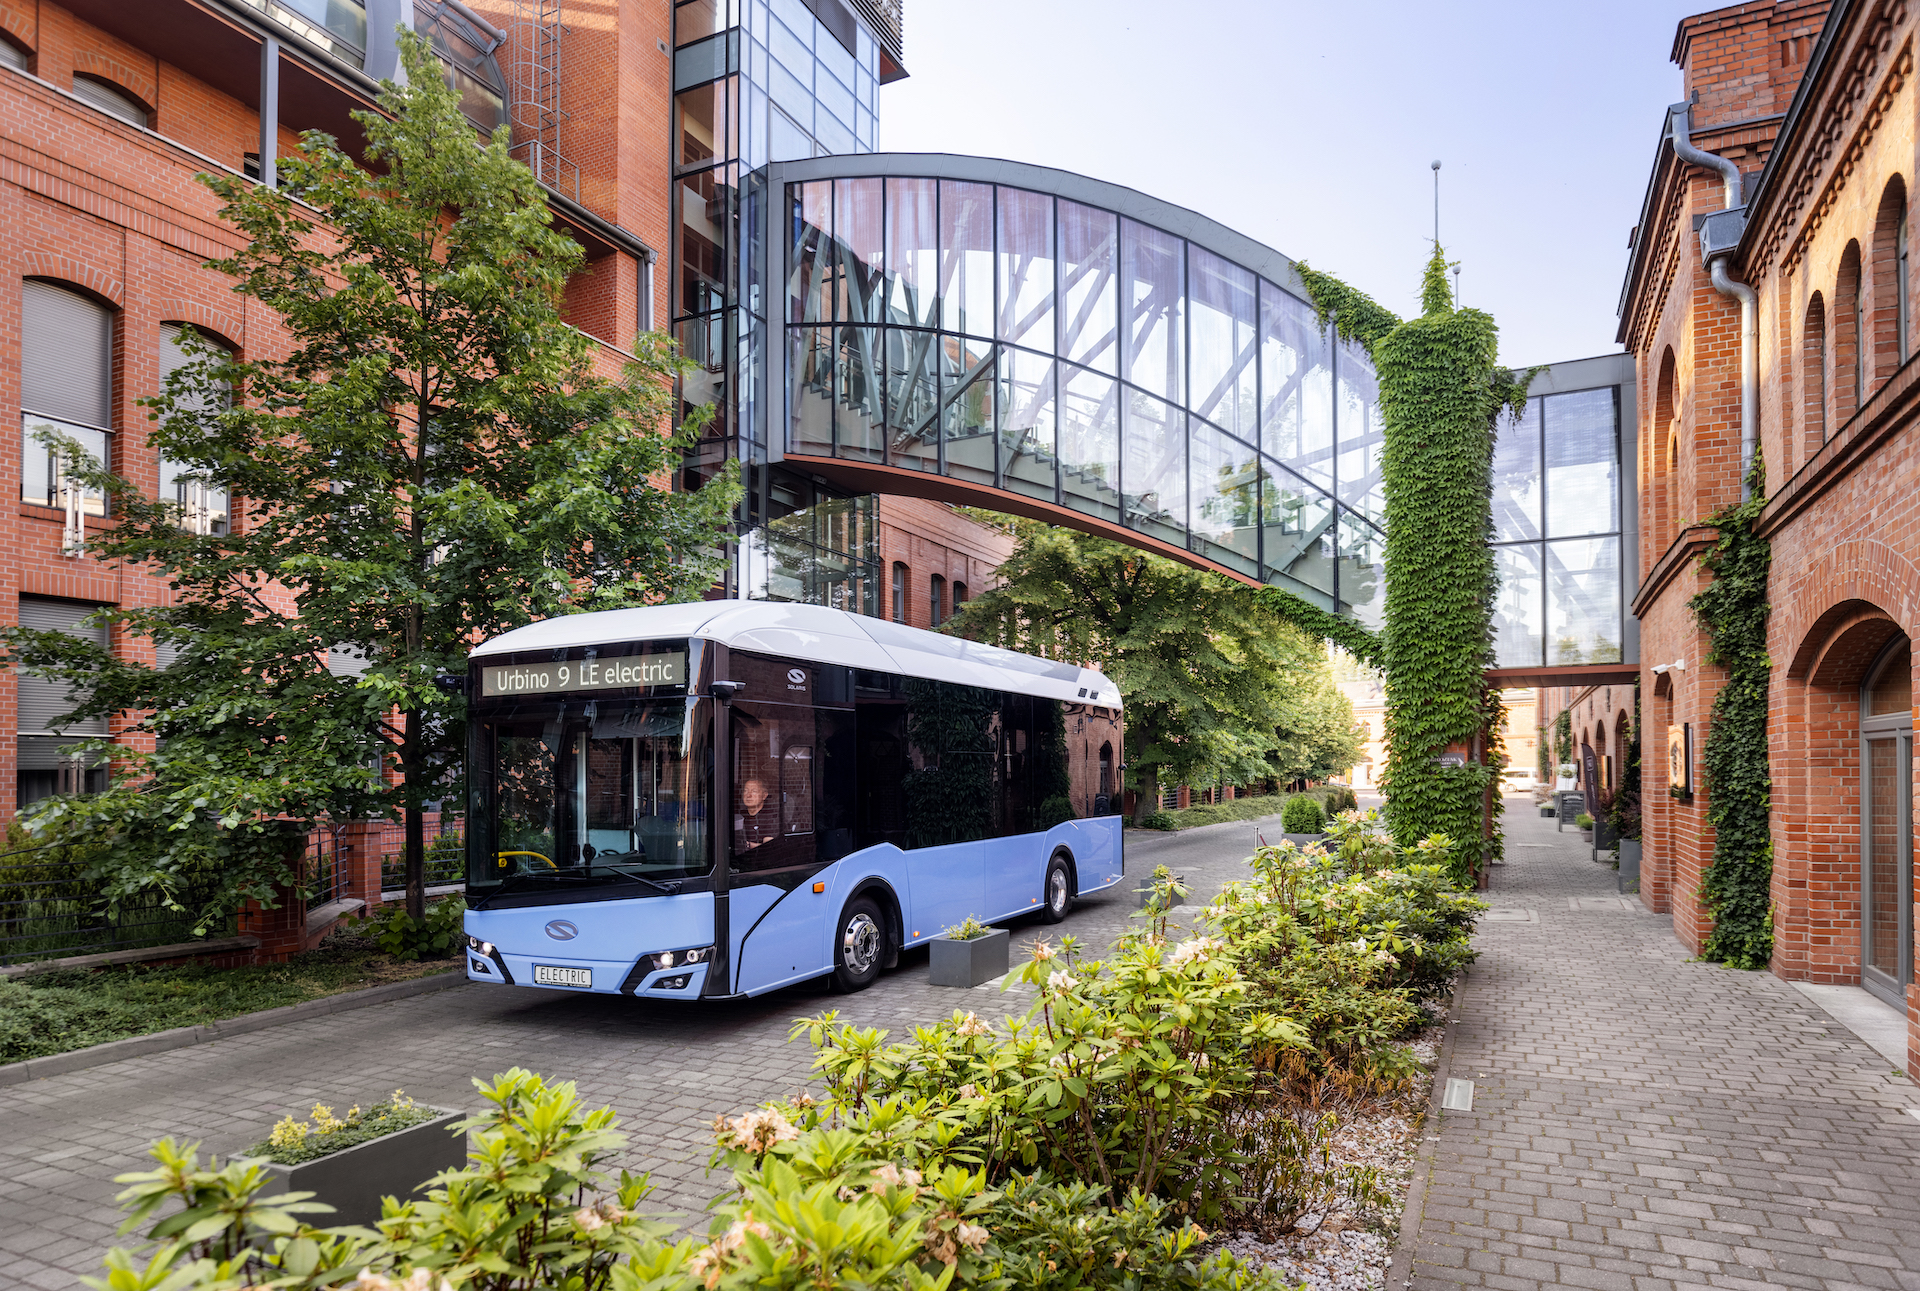 Introducing the Urbino 9 LE electric bus